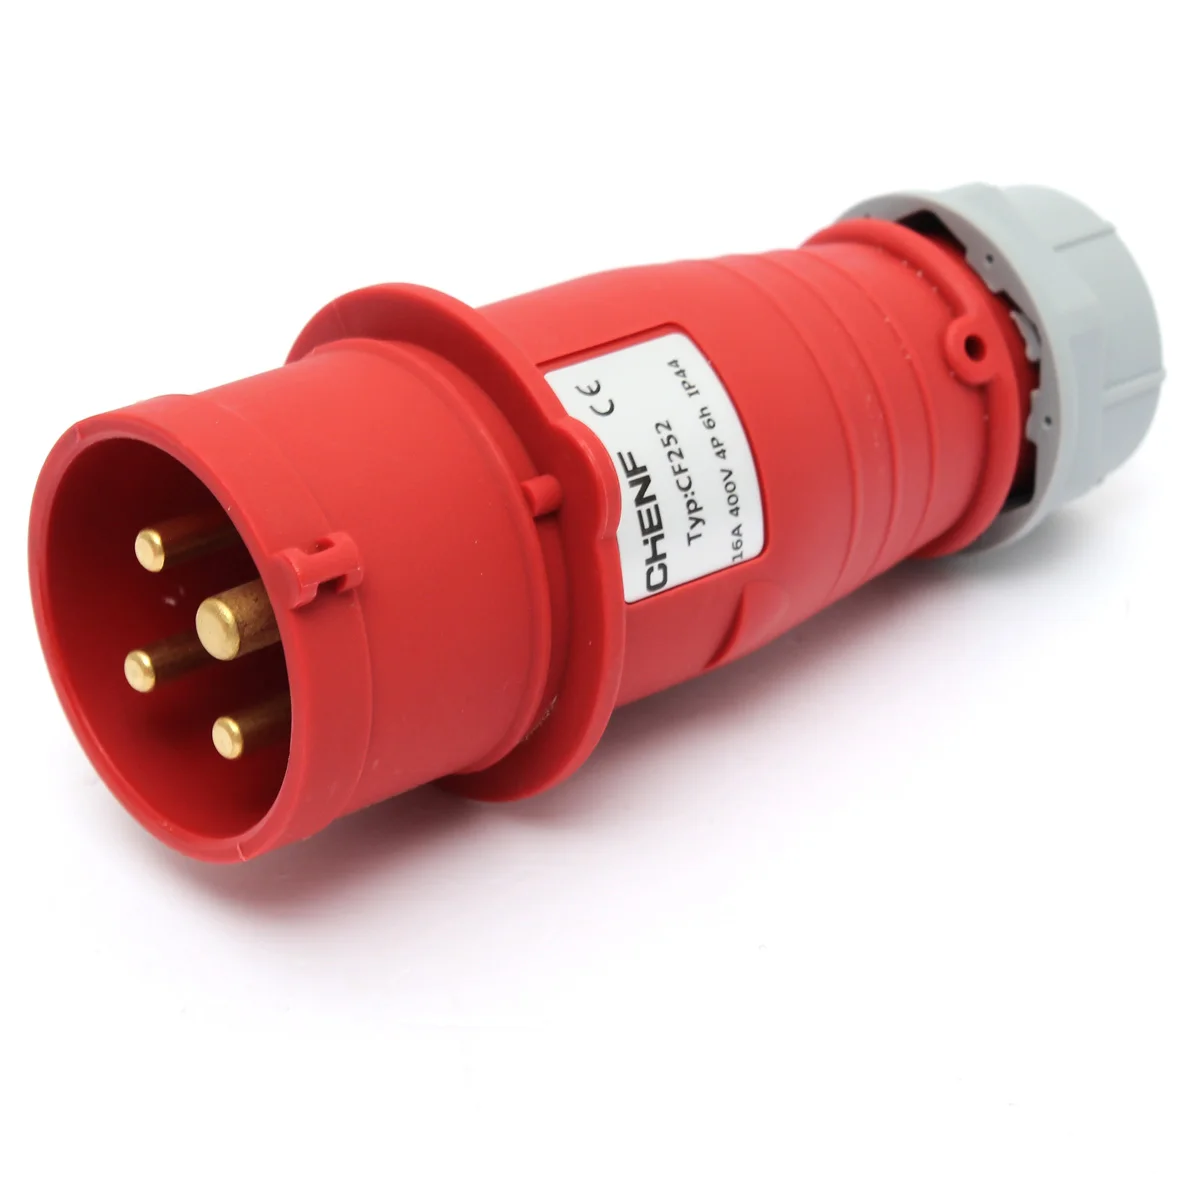 Buy Good Quality Cf1463 16amp Waterproof 3 Pin Socket Ip44 230 Volts Nylon Industrial Socket 3 Phase In Cheap Price On M Alibaba Com